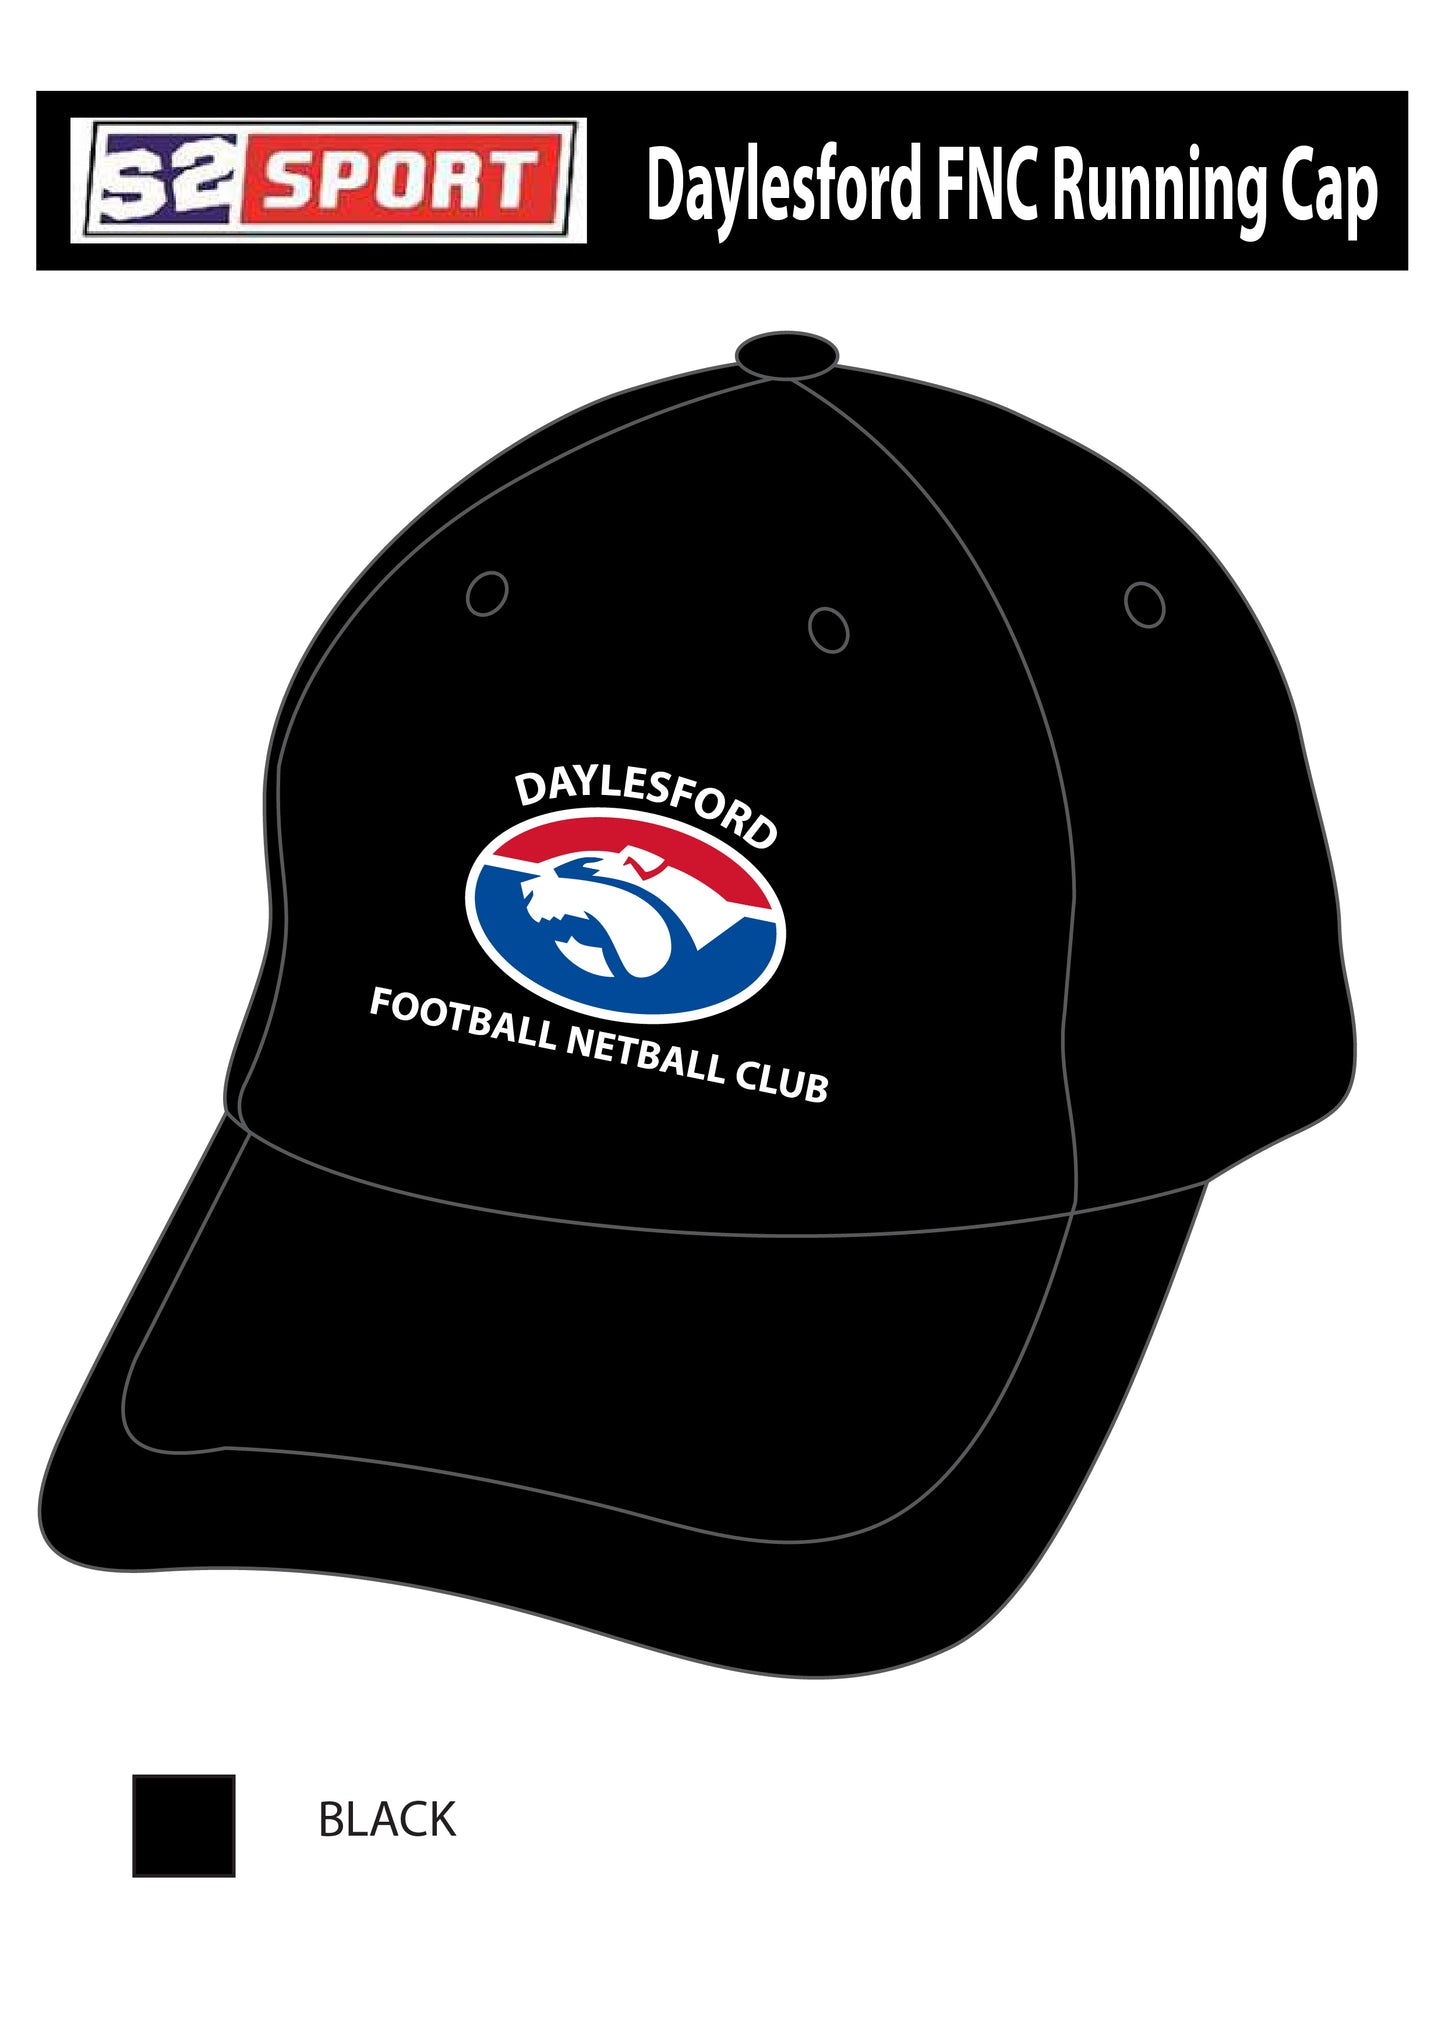 Daylesford Football and Netball Club Caps